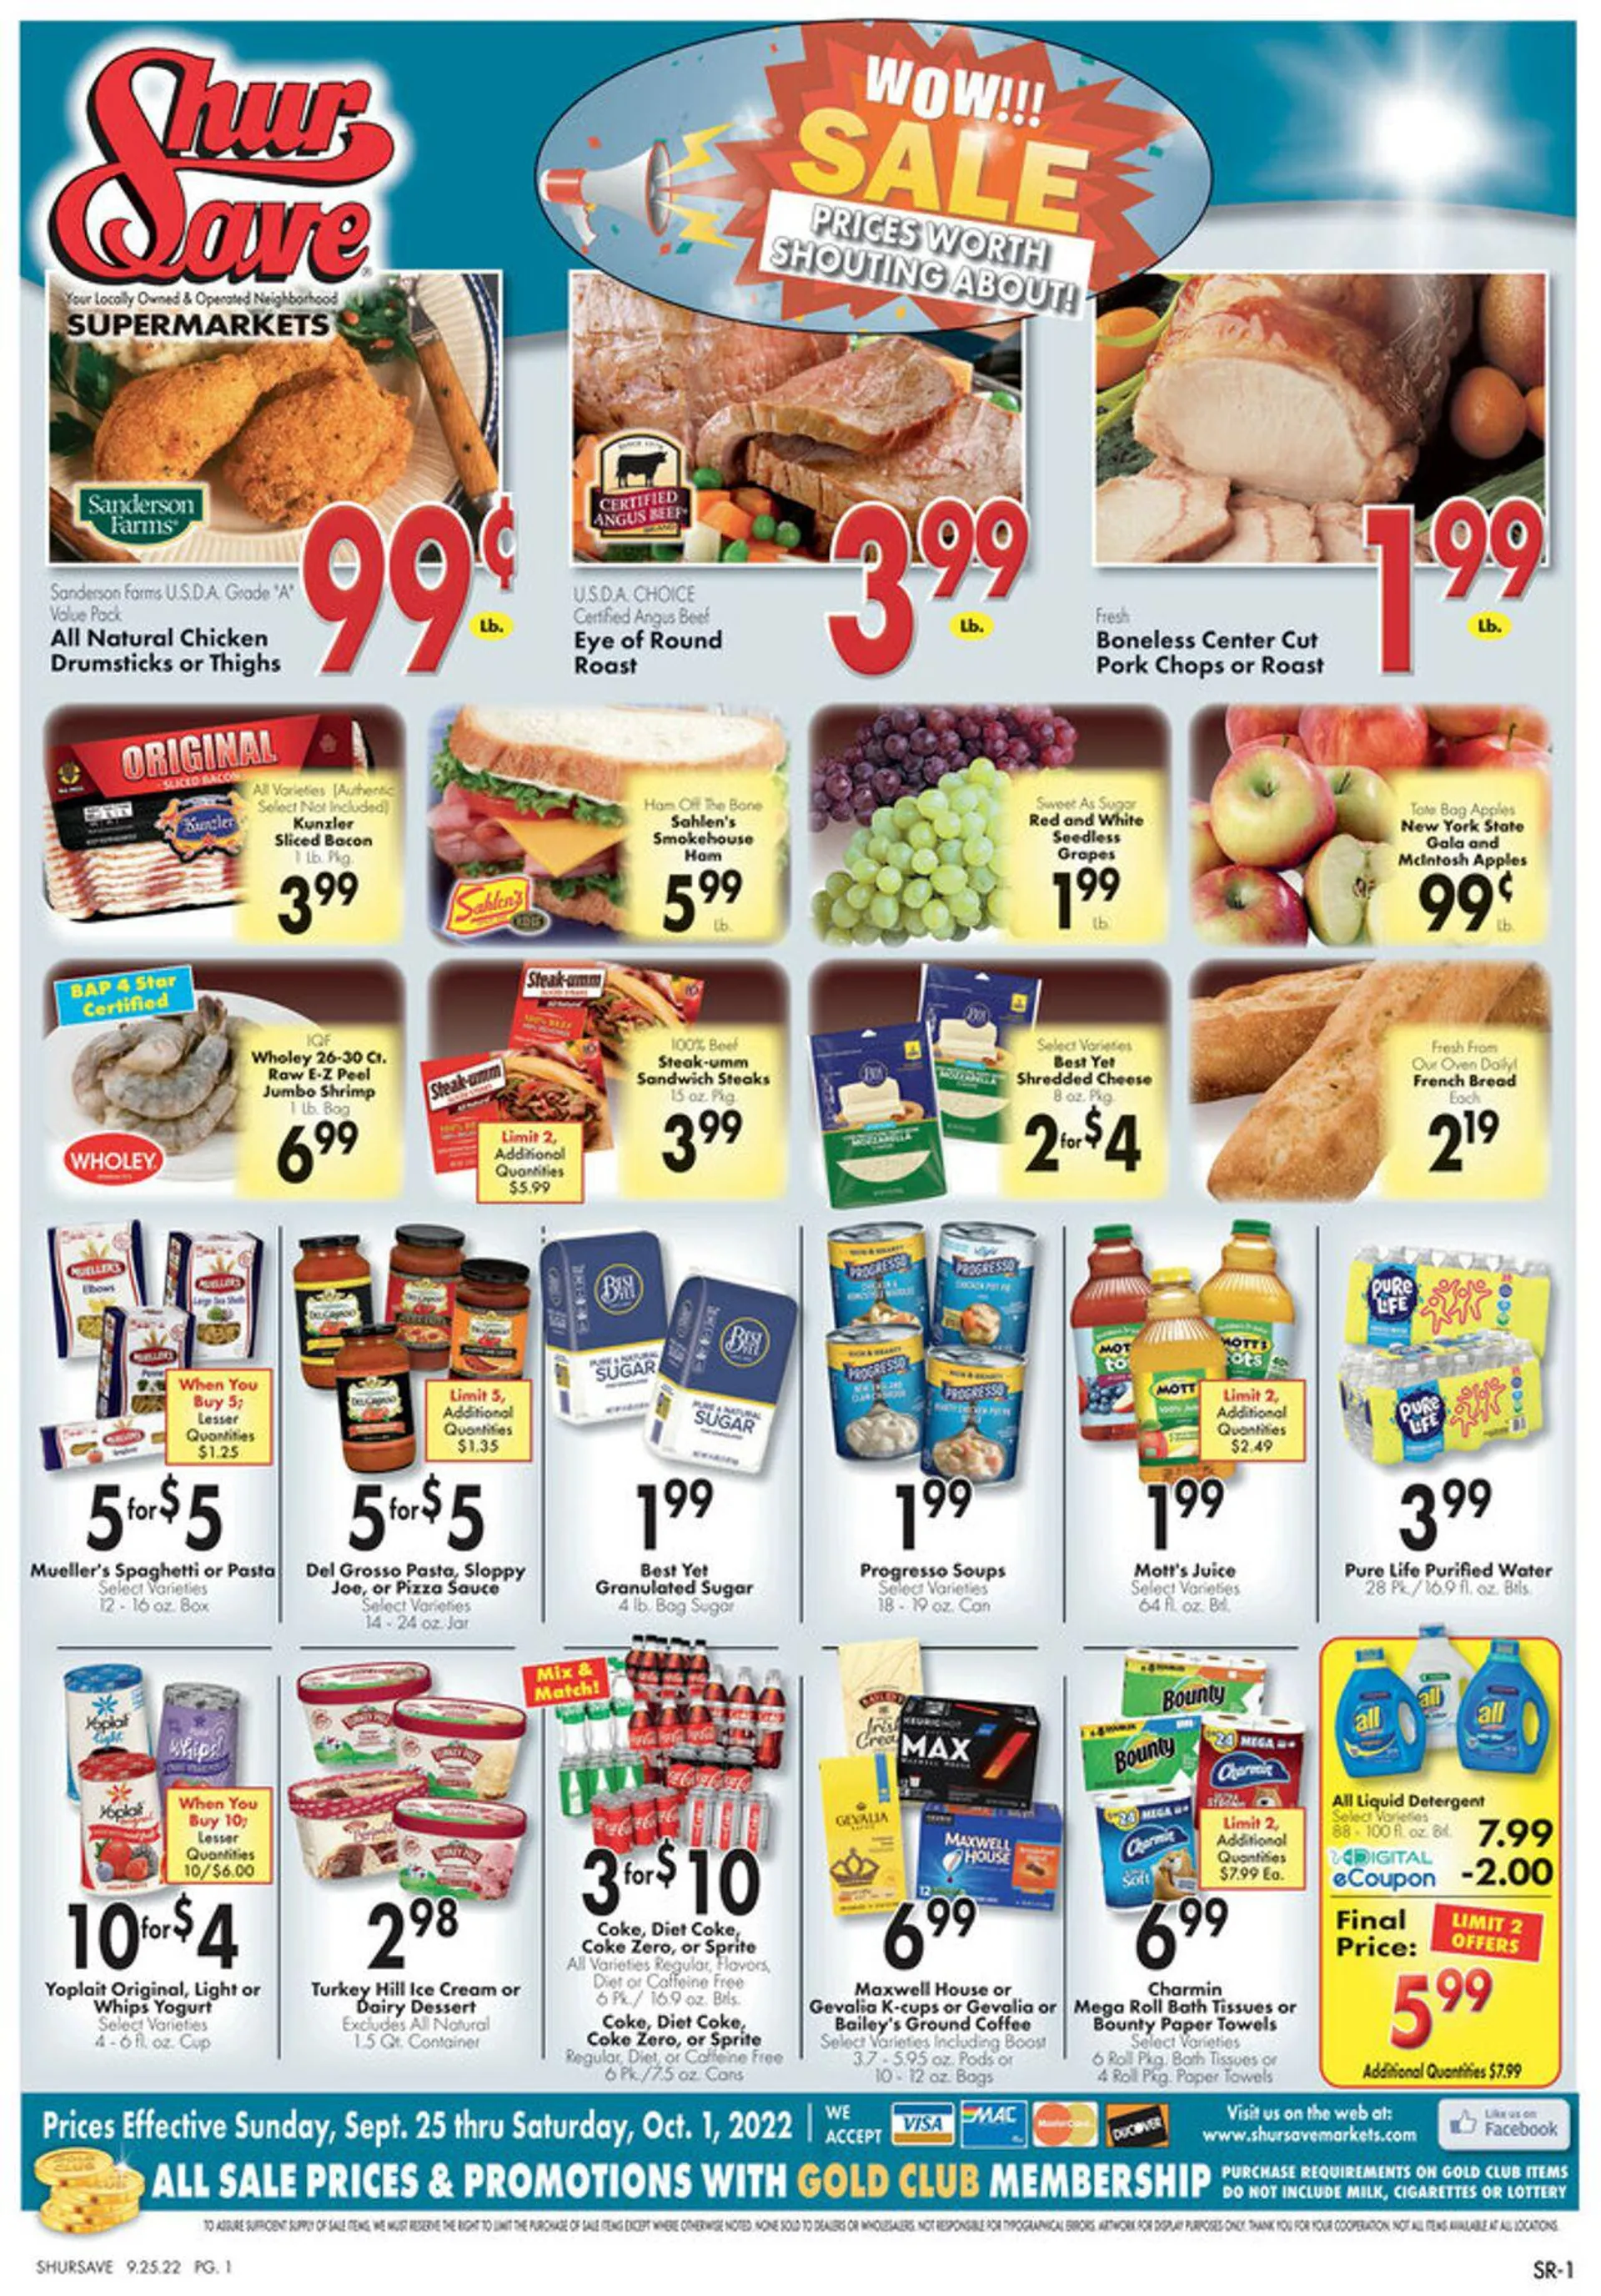 Gerritys Supermarkets Current weekly ad - 2